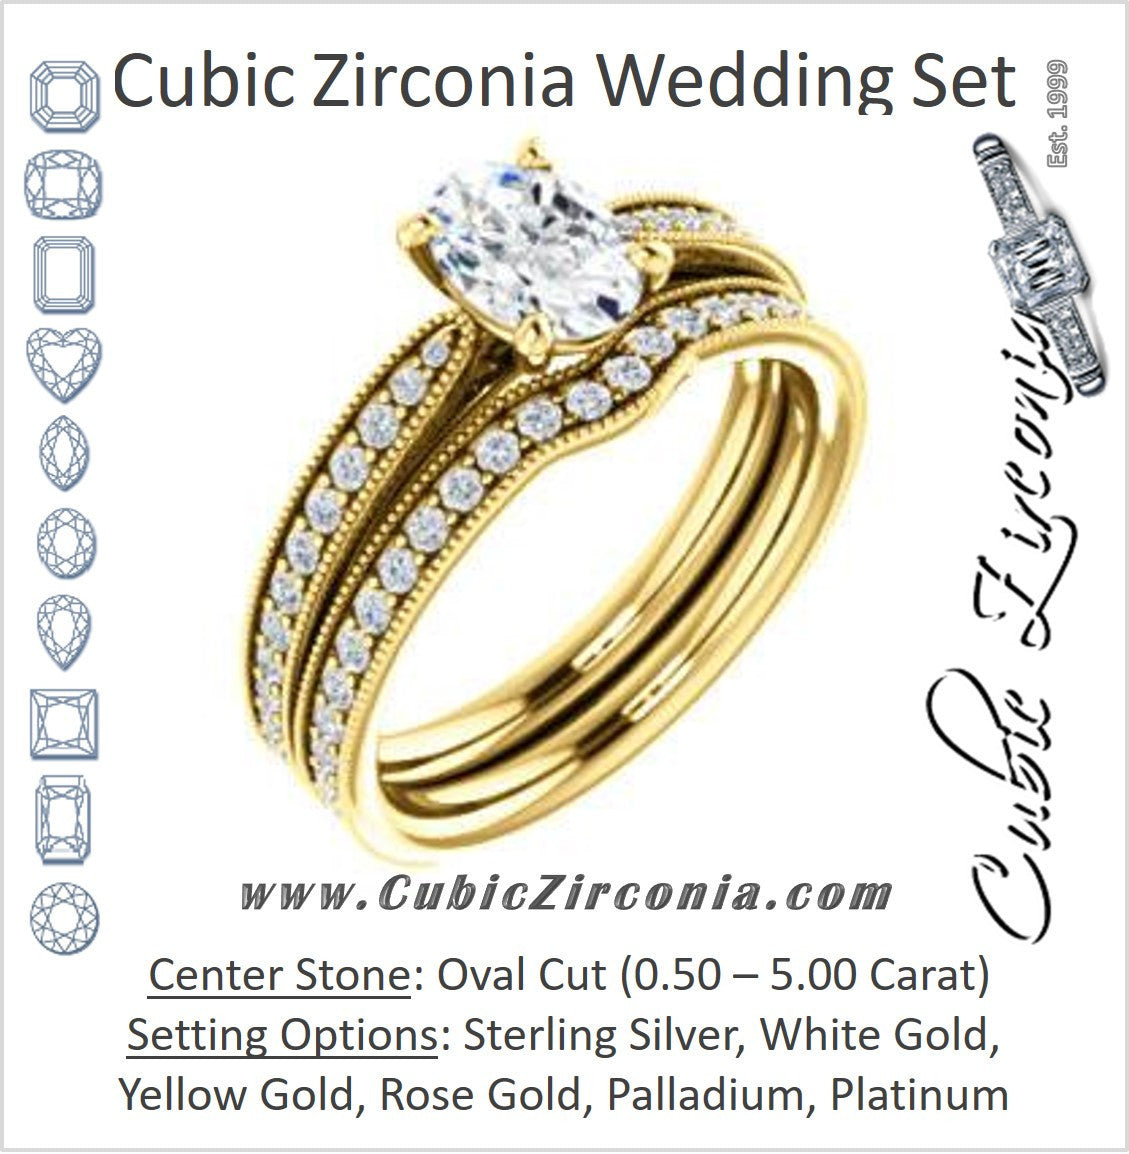 CZ Wedding Set, featuring The Brooklynn engagement ring (Customizable Oval Cut with Cathedral Setting and Milgrained Pavé Band)